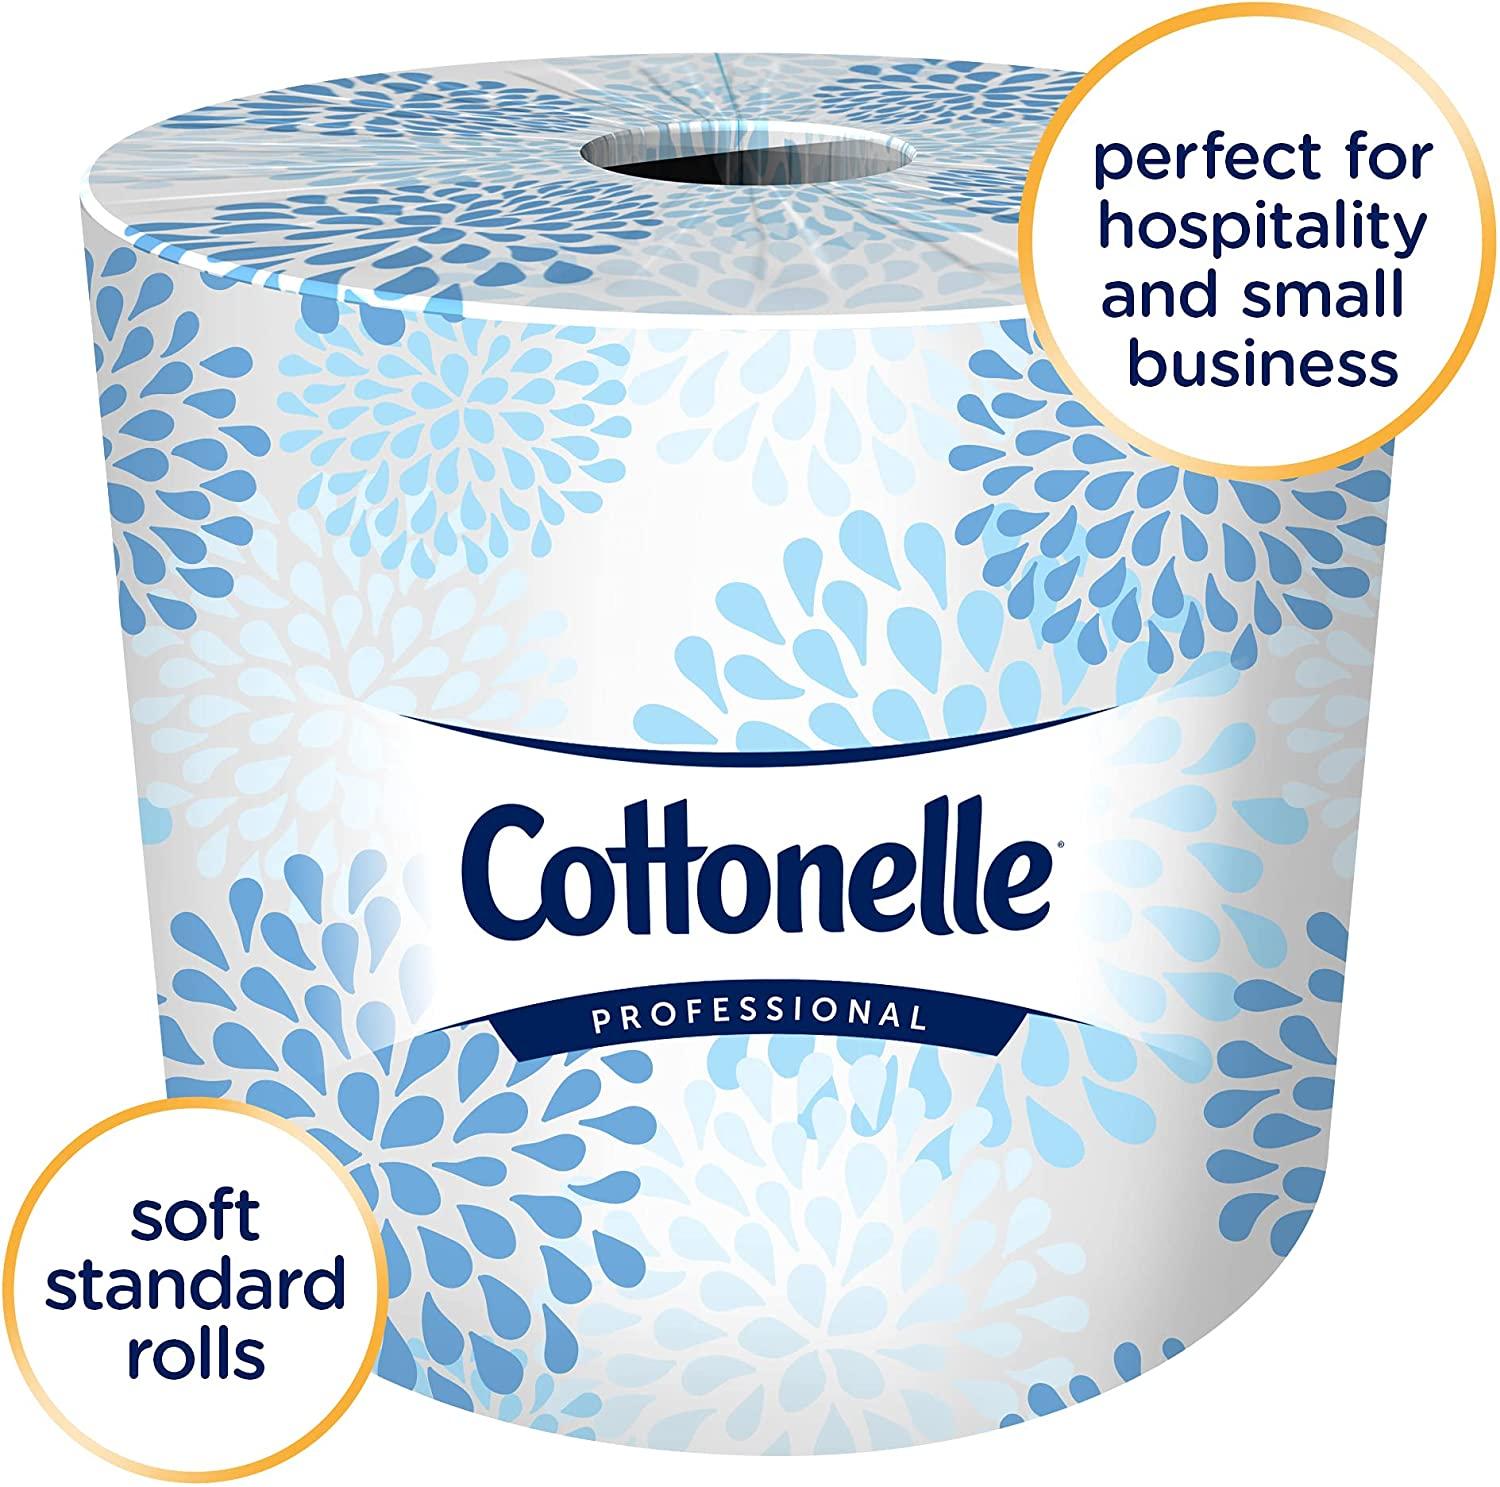 60 Cottonelle 2-Ply Bulk Professional Standard Toilet Paper for $38.93 Shipped